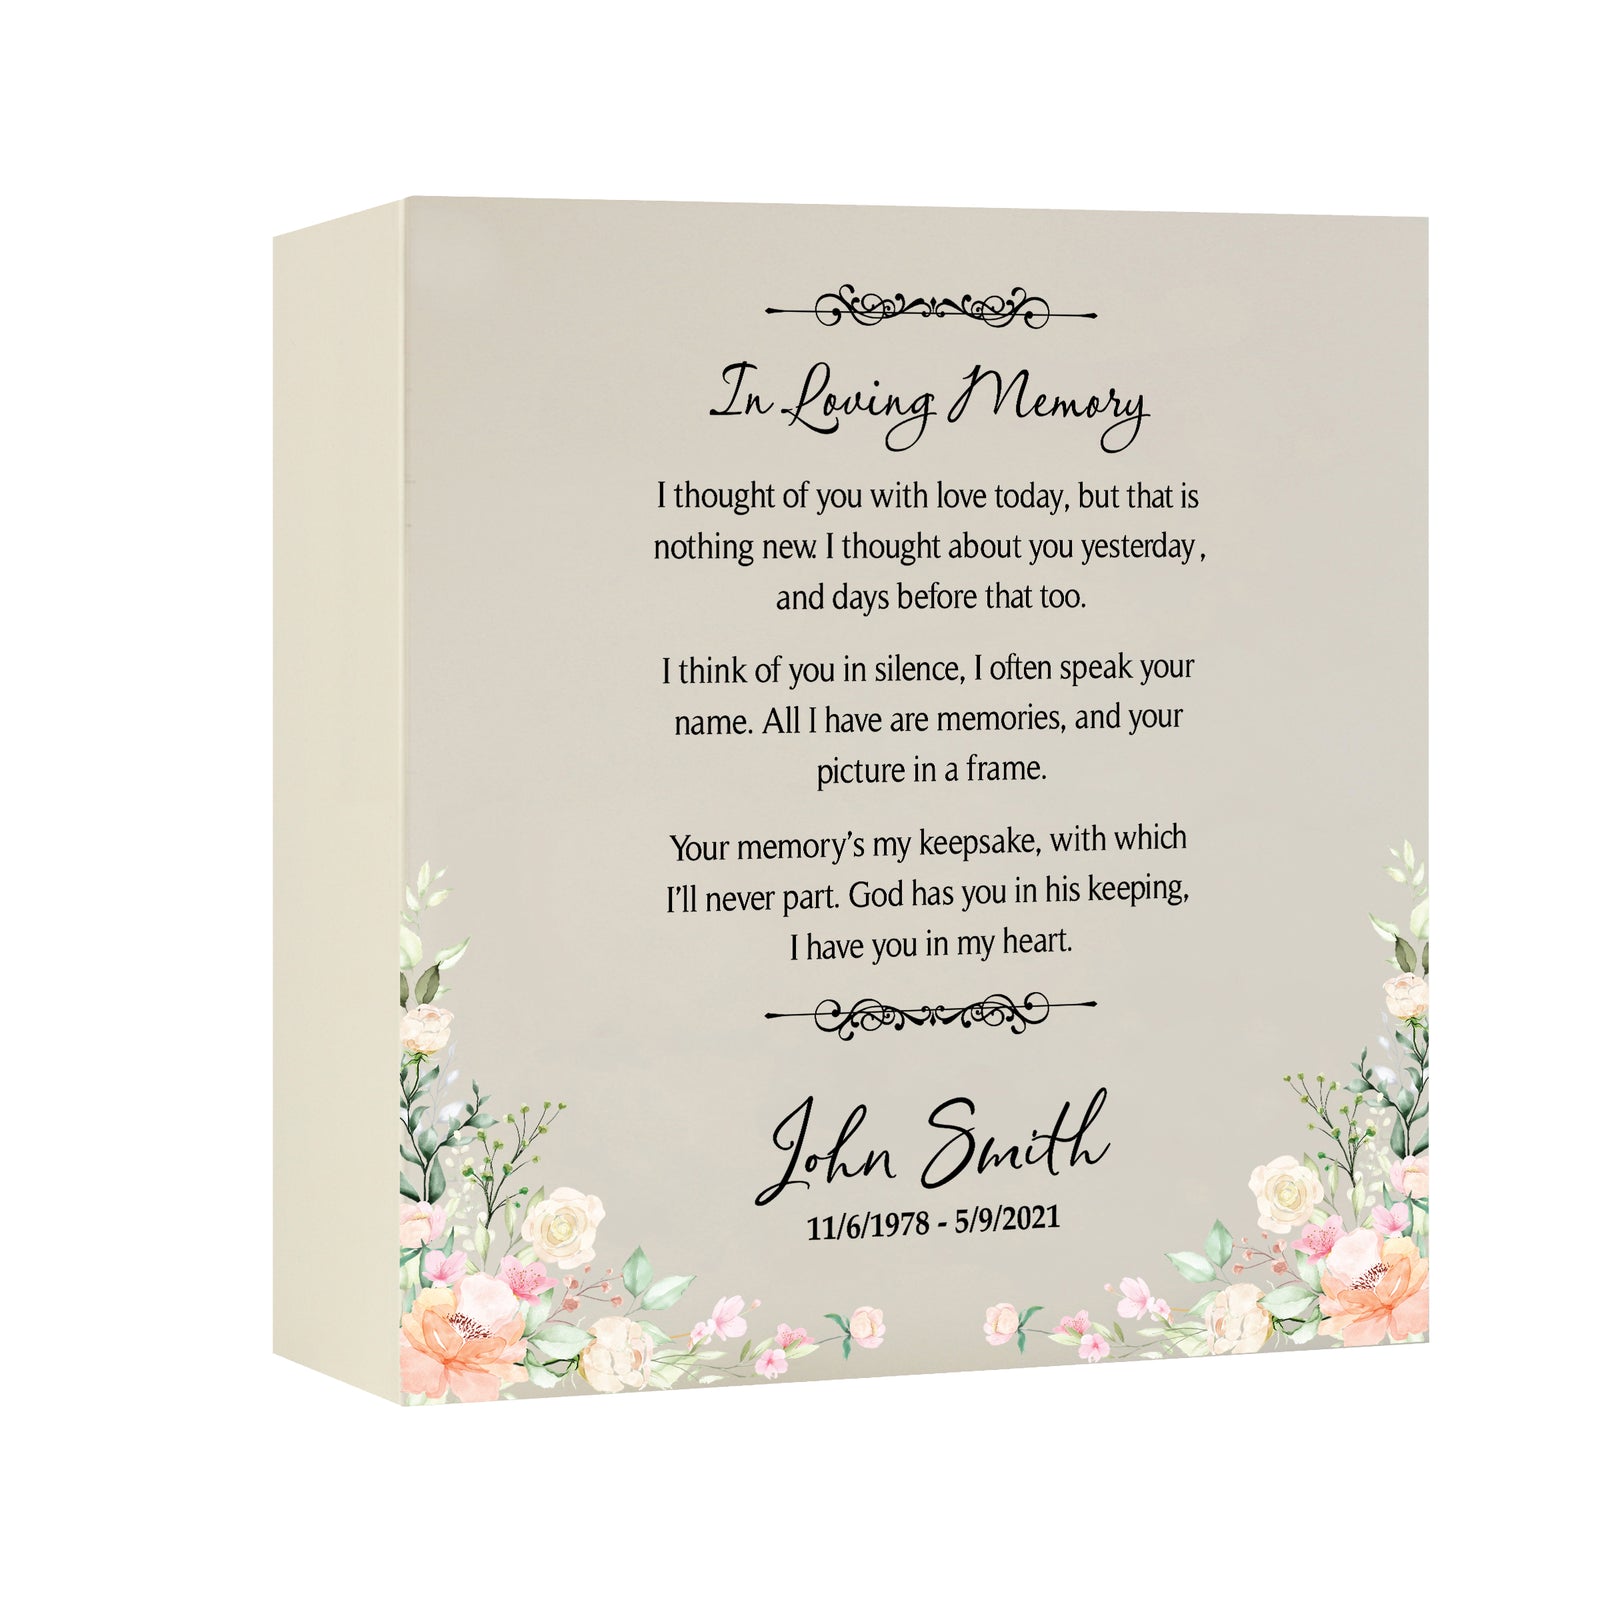 Timeless Human Memorial Shadow Box Urn With Inspirational Verse in Ivory - In Loving Memory